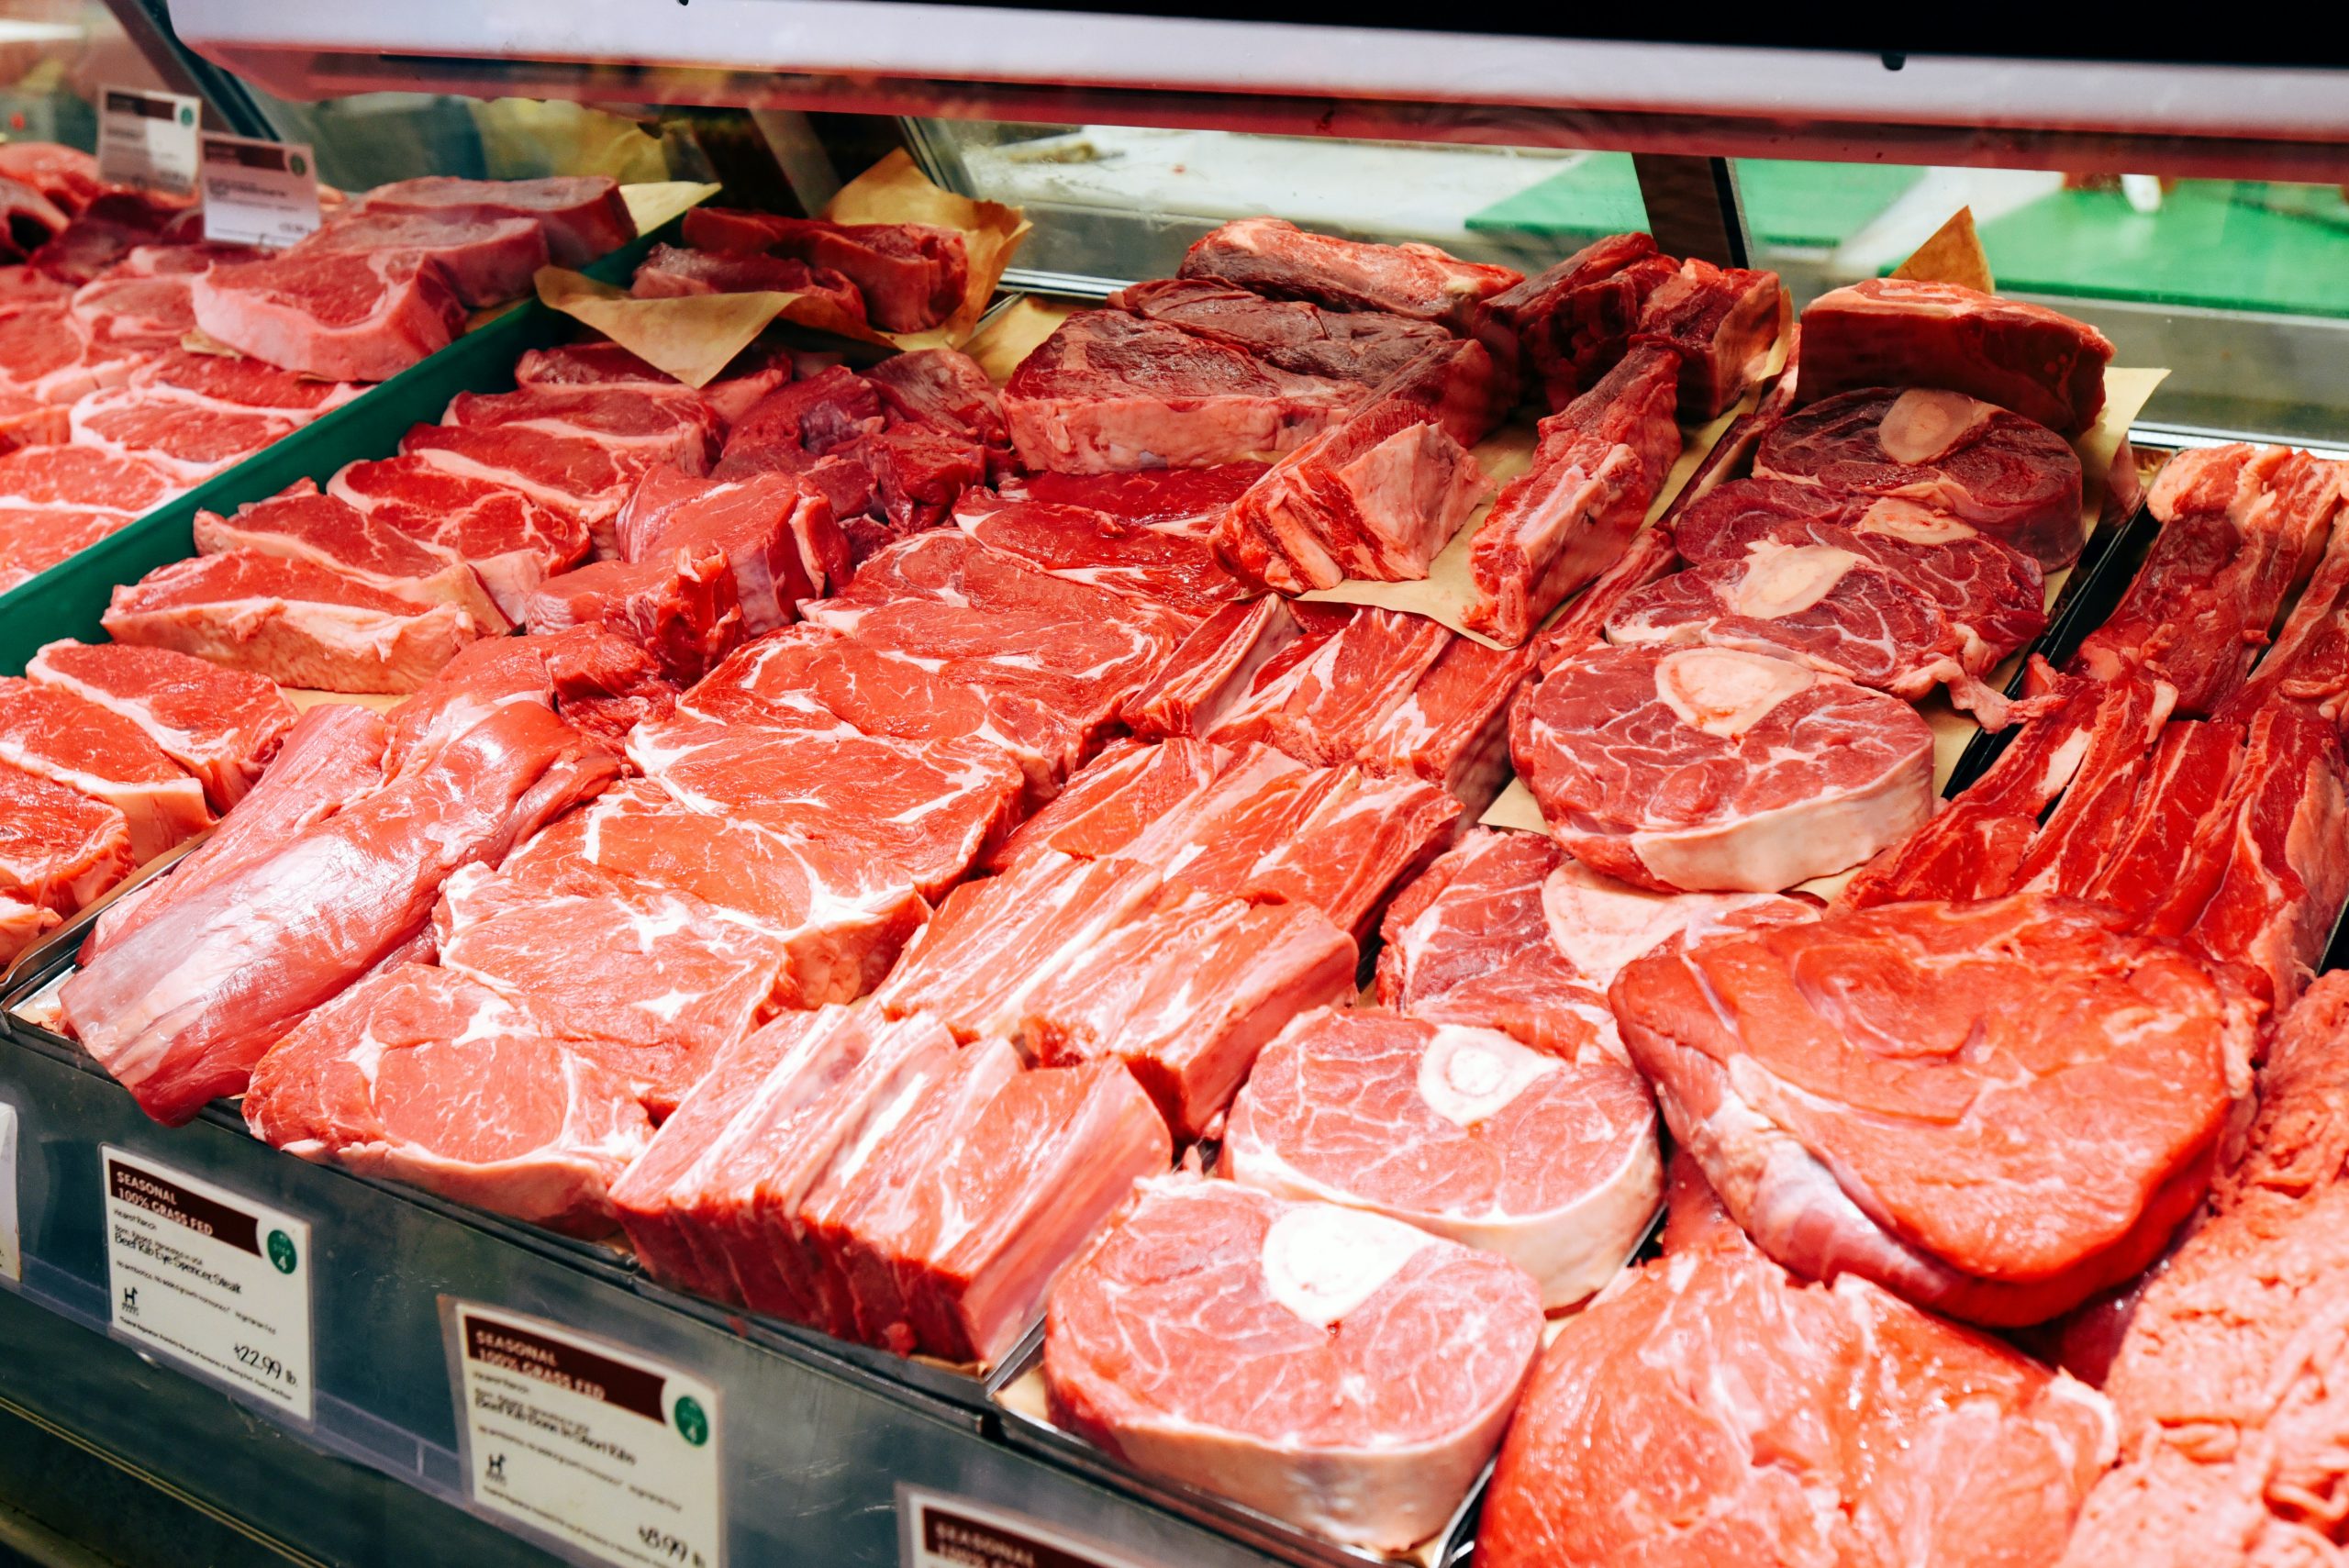 Do beef prices drive consumption or does beef consumption drive prices?